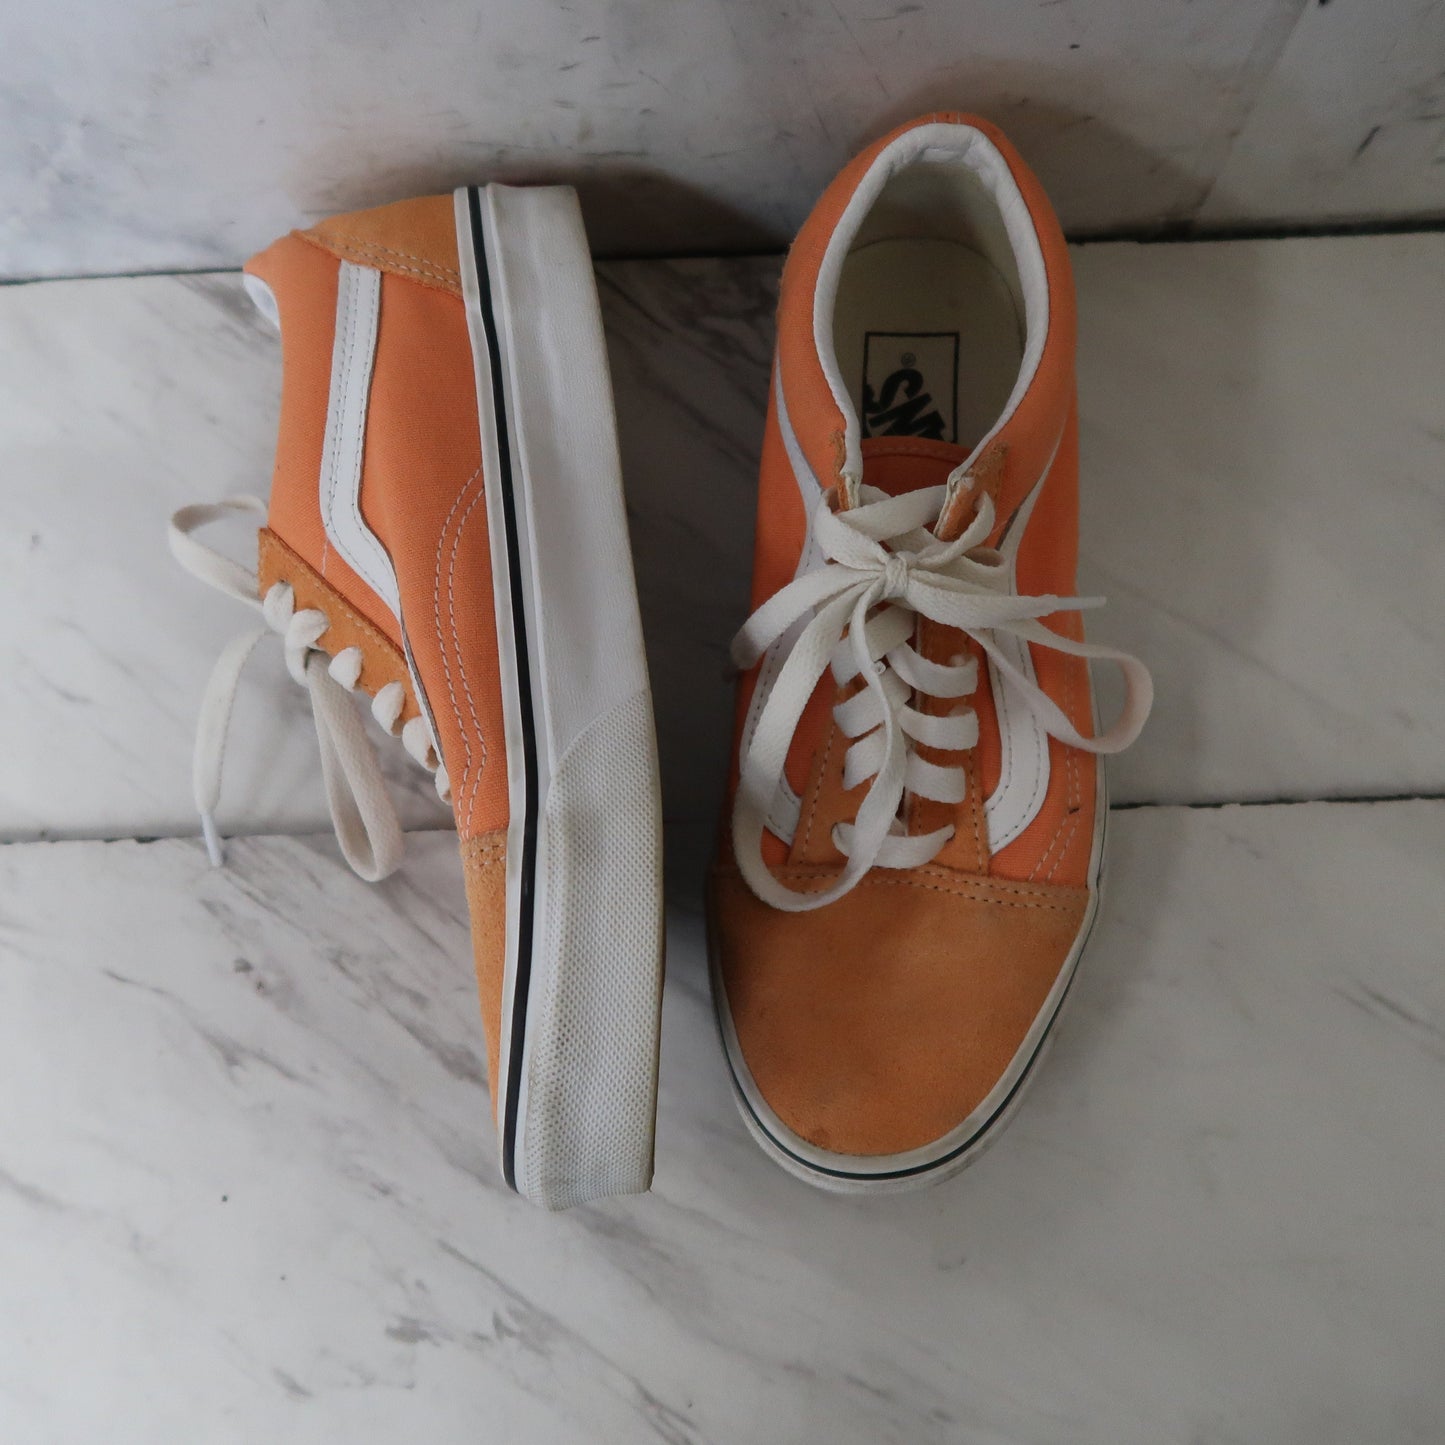 Shoes Sneakers By Vans  Size: 6.5